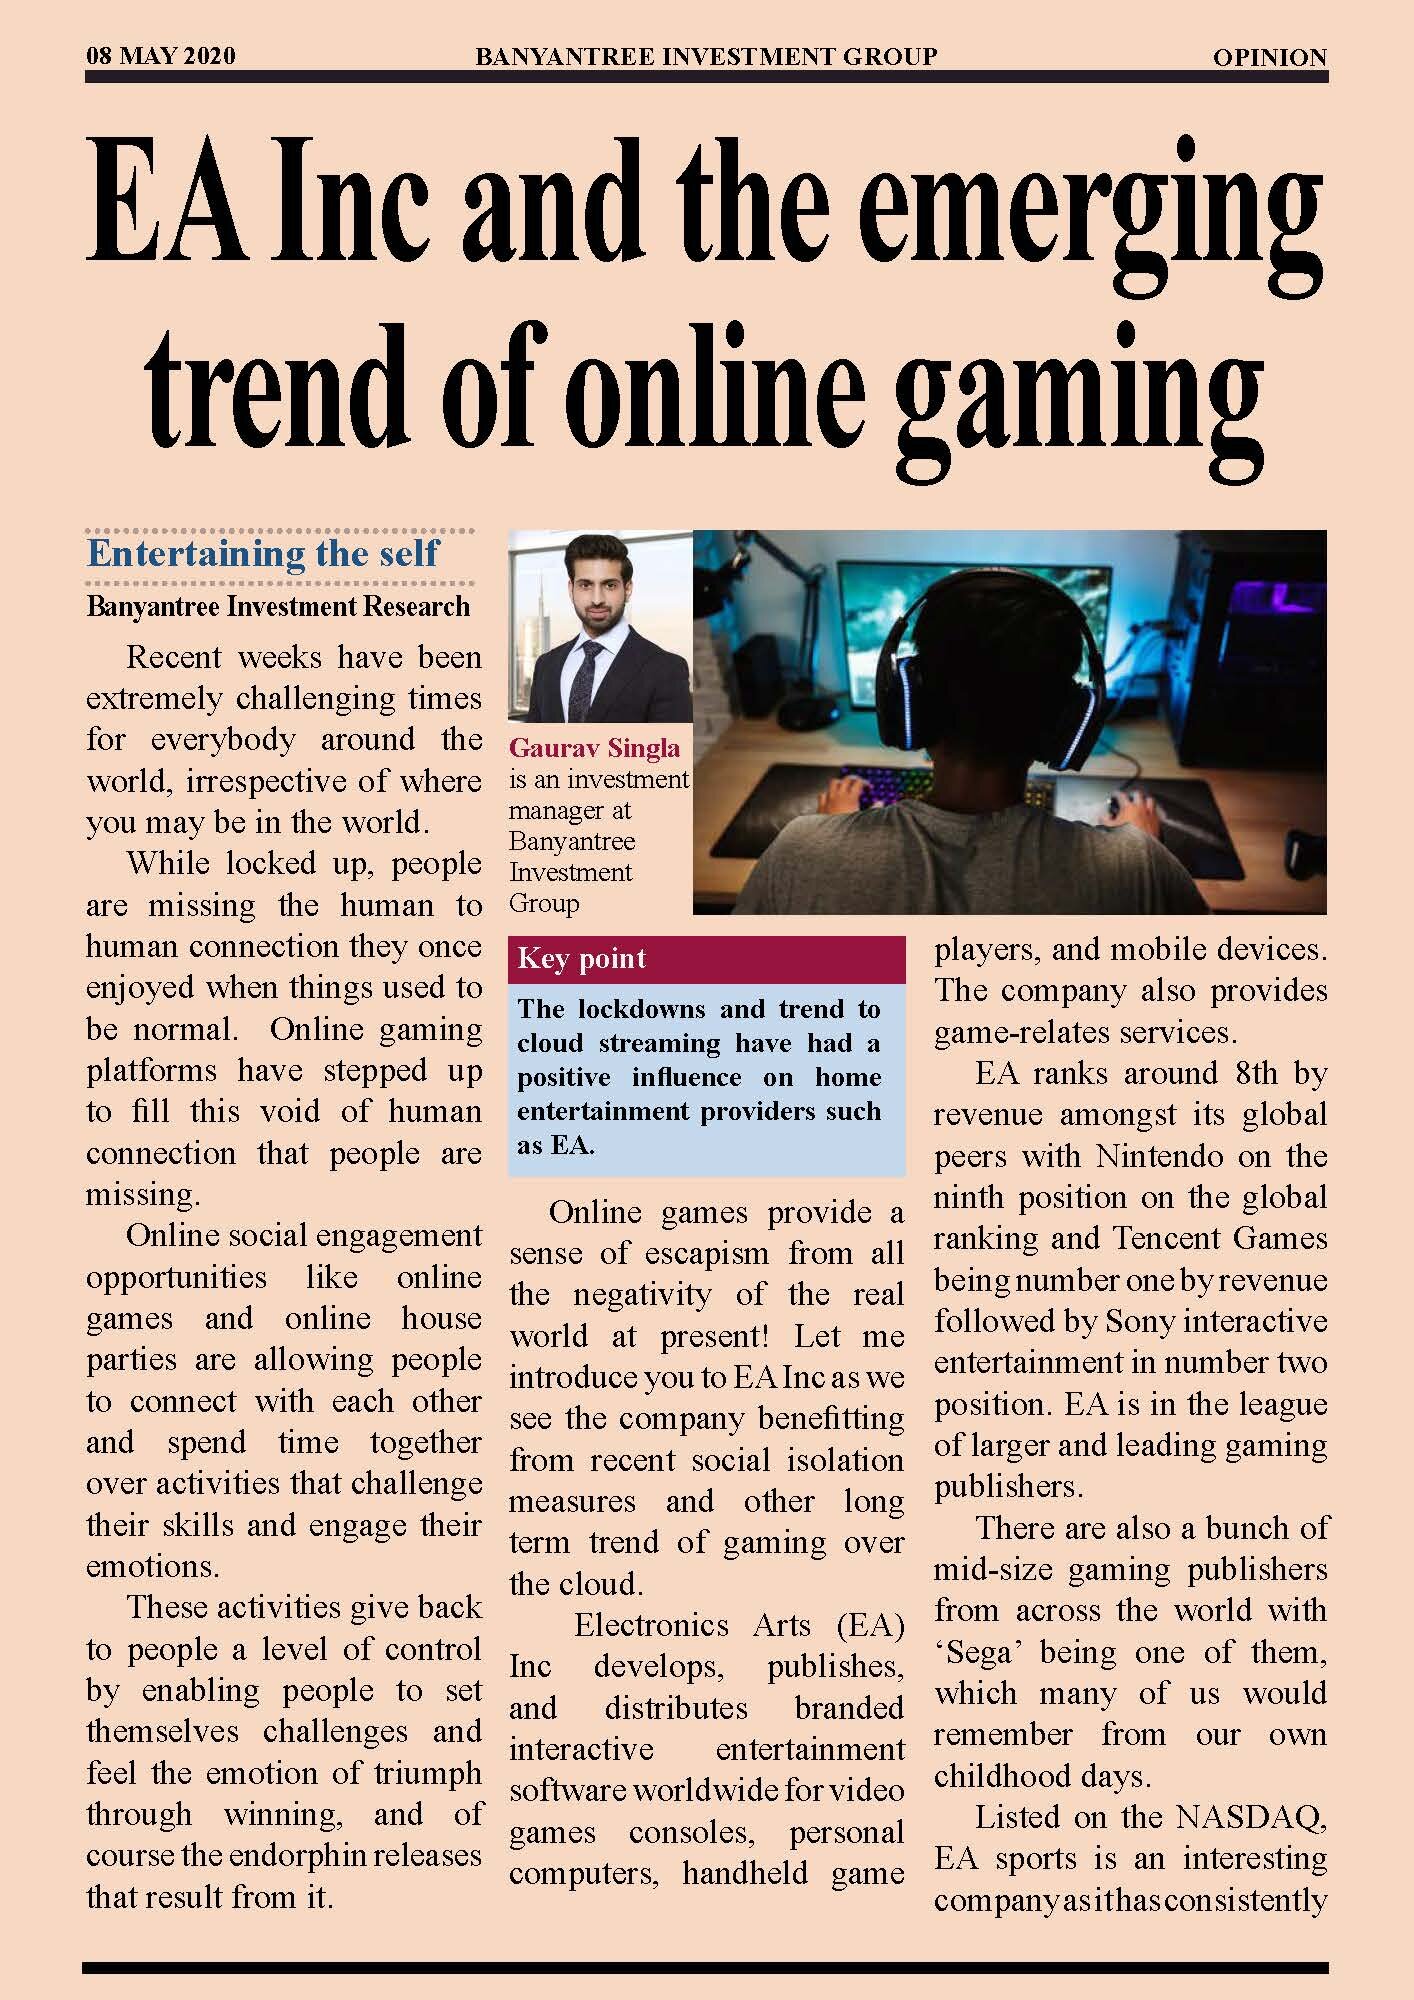 EA Inc and the emerging trend of online gaming_Page_1.jpg